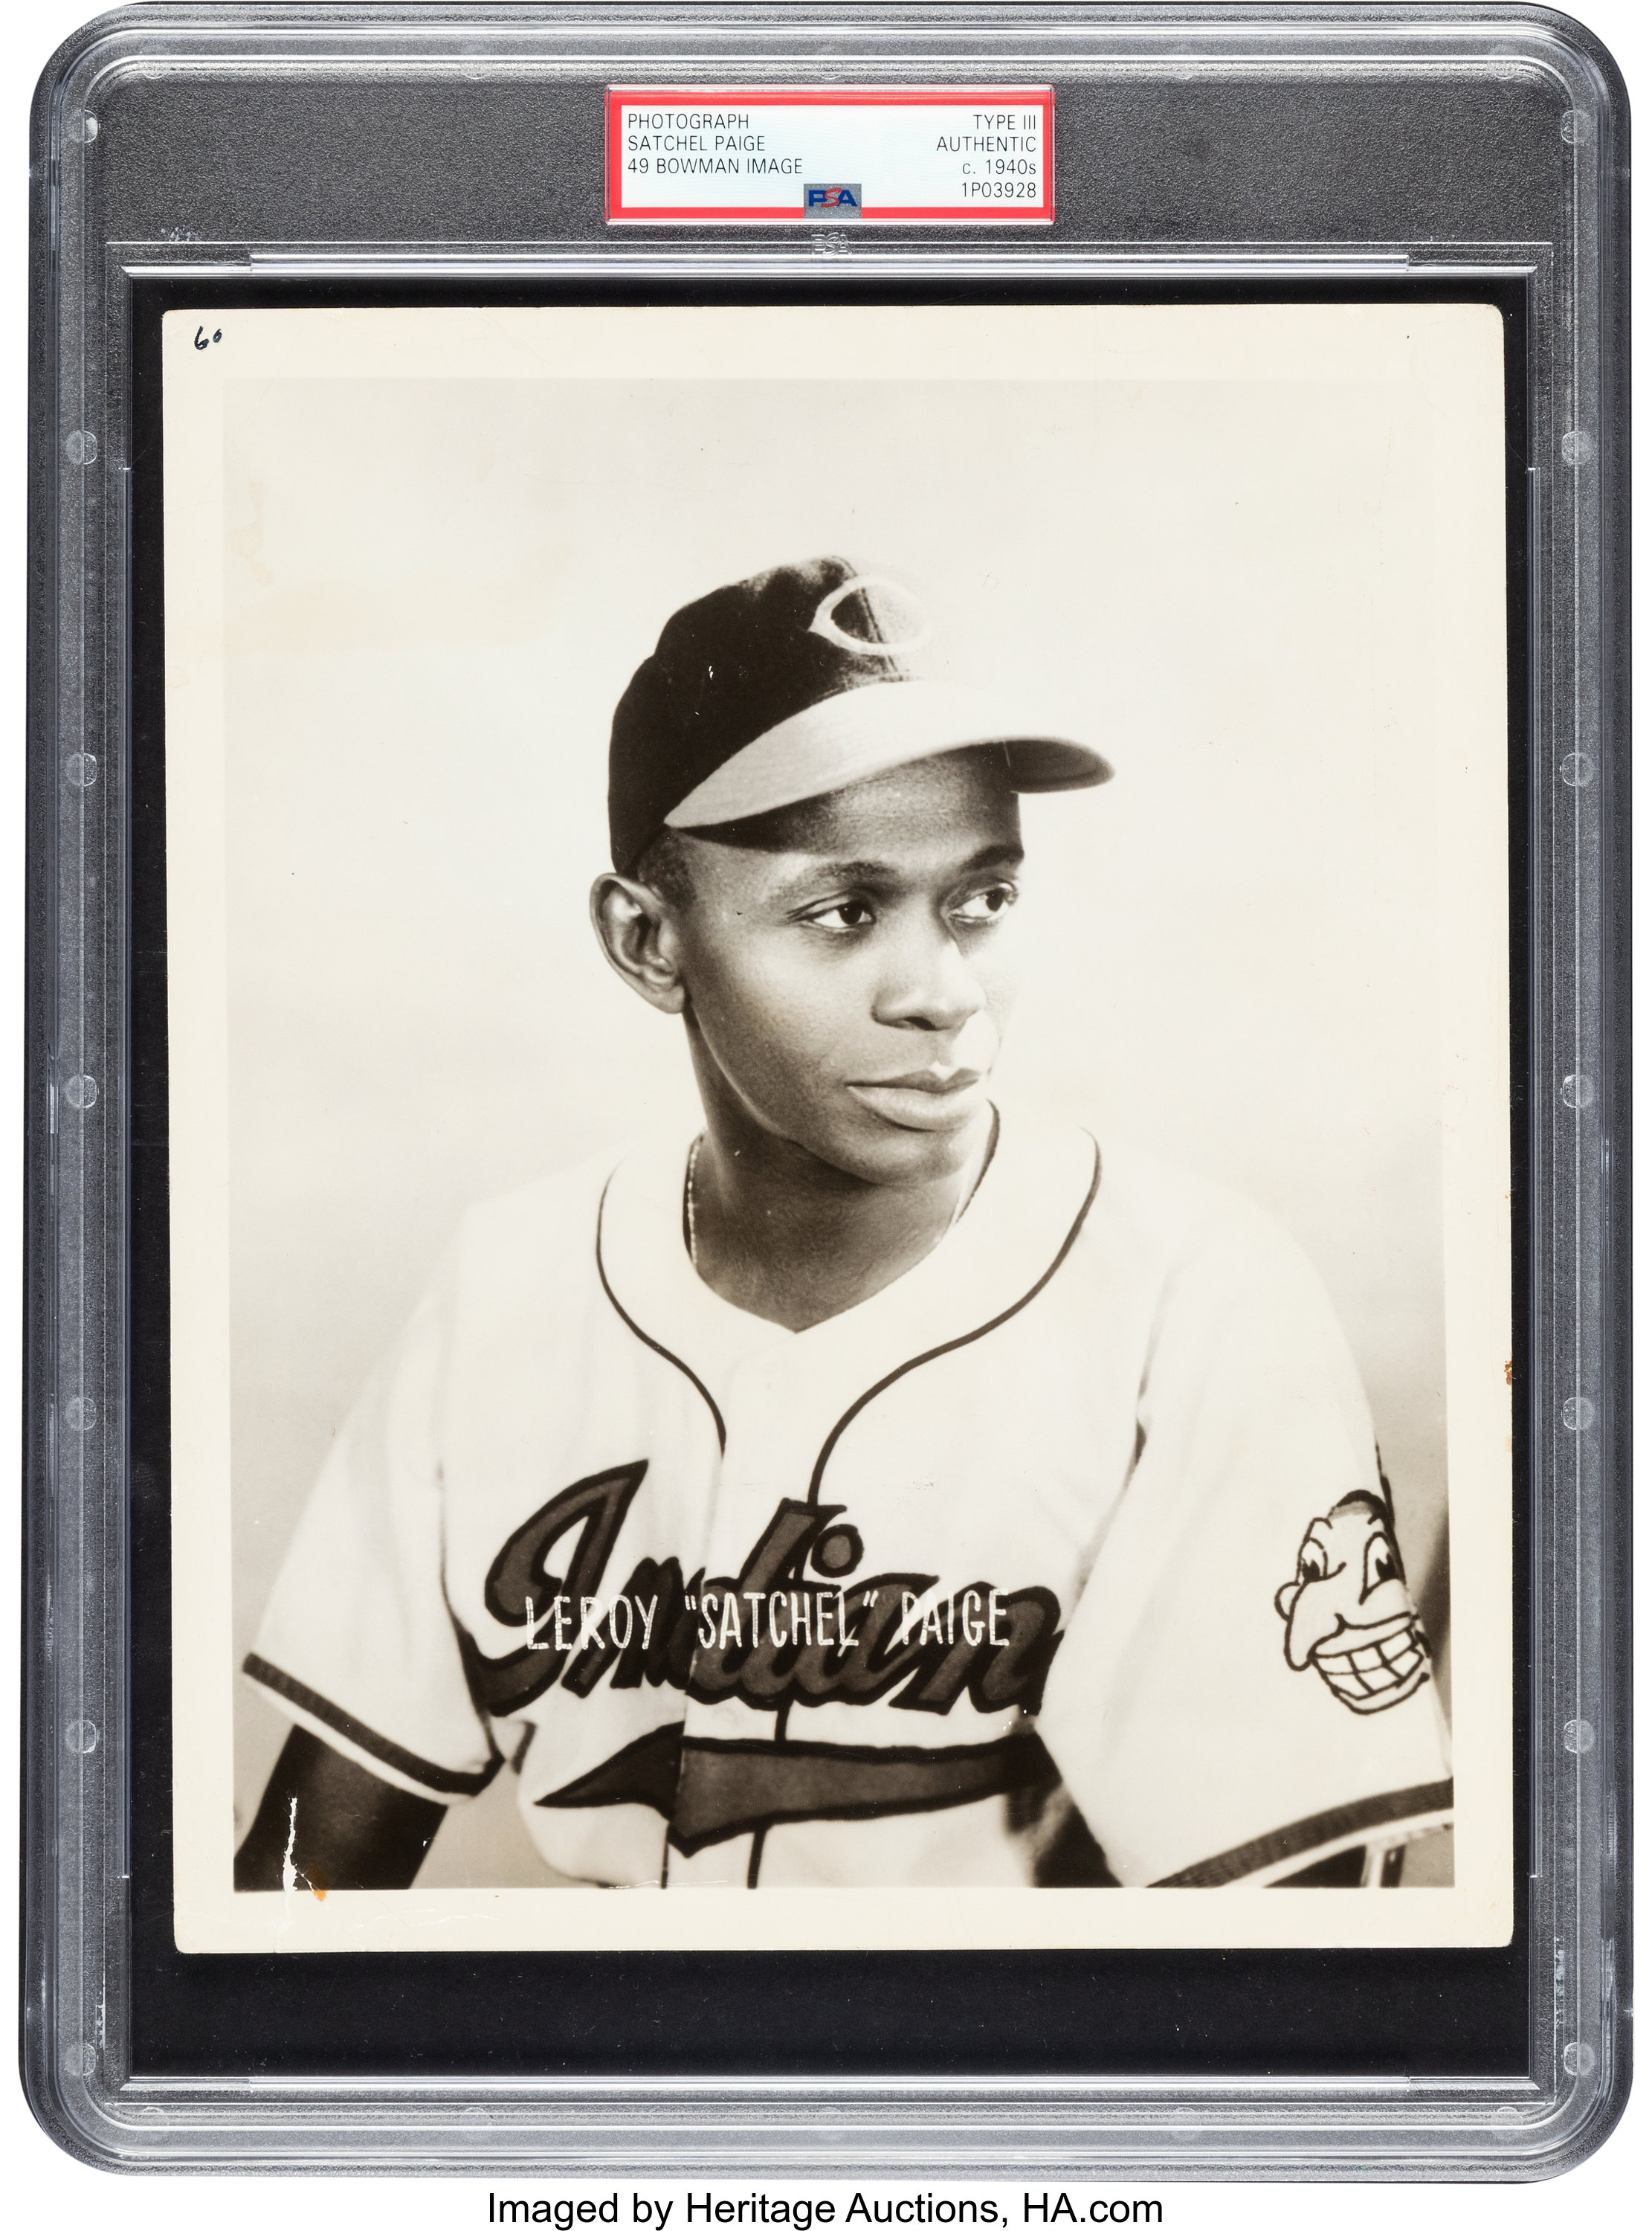 Satchel Paige Stunning Handcrafted 3D Baseball Card of the 